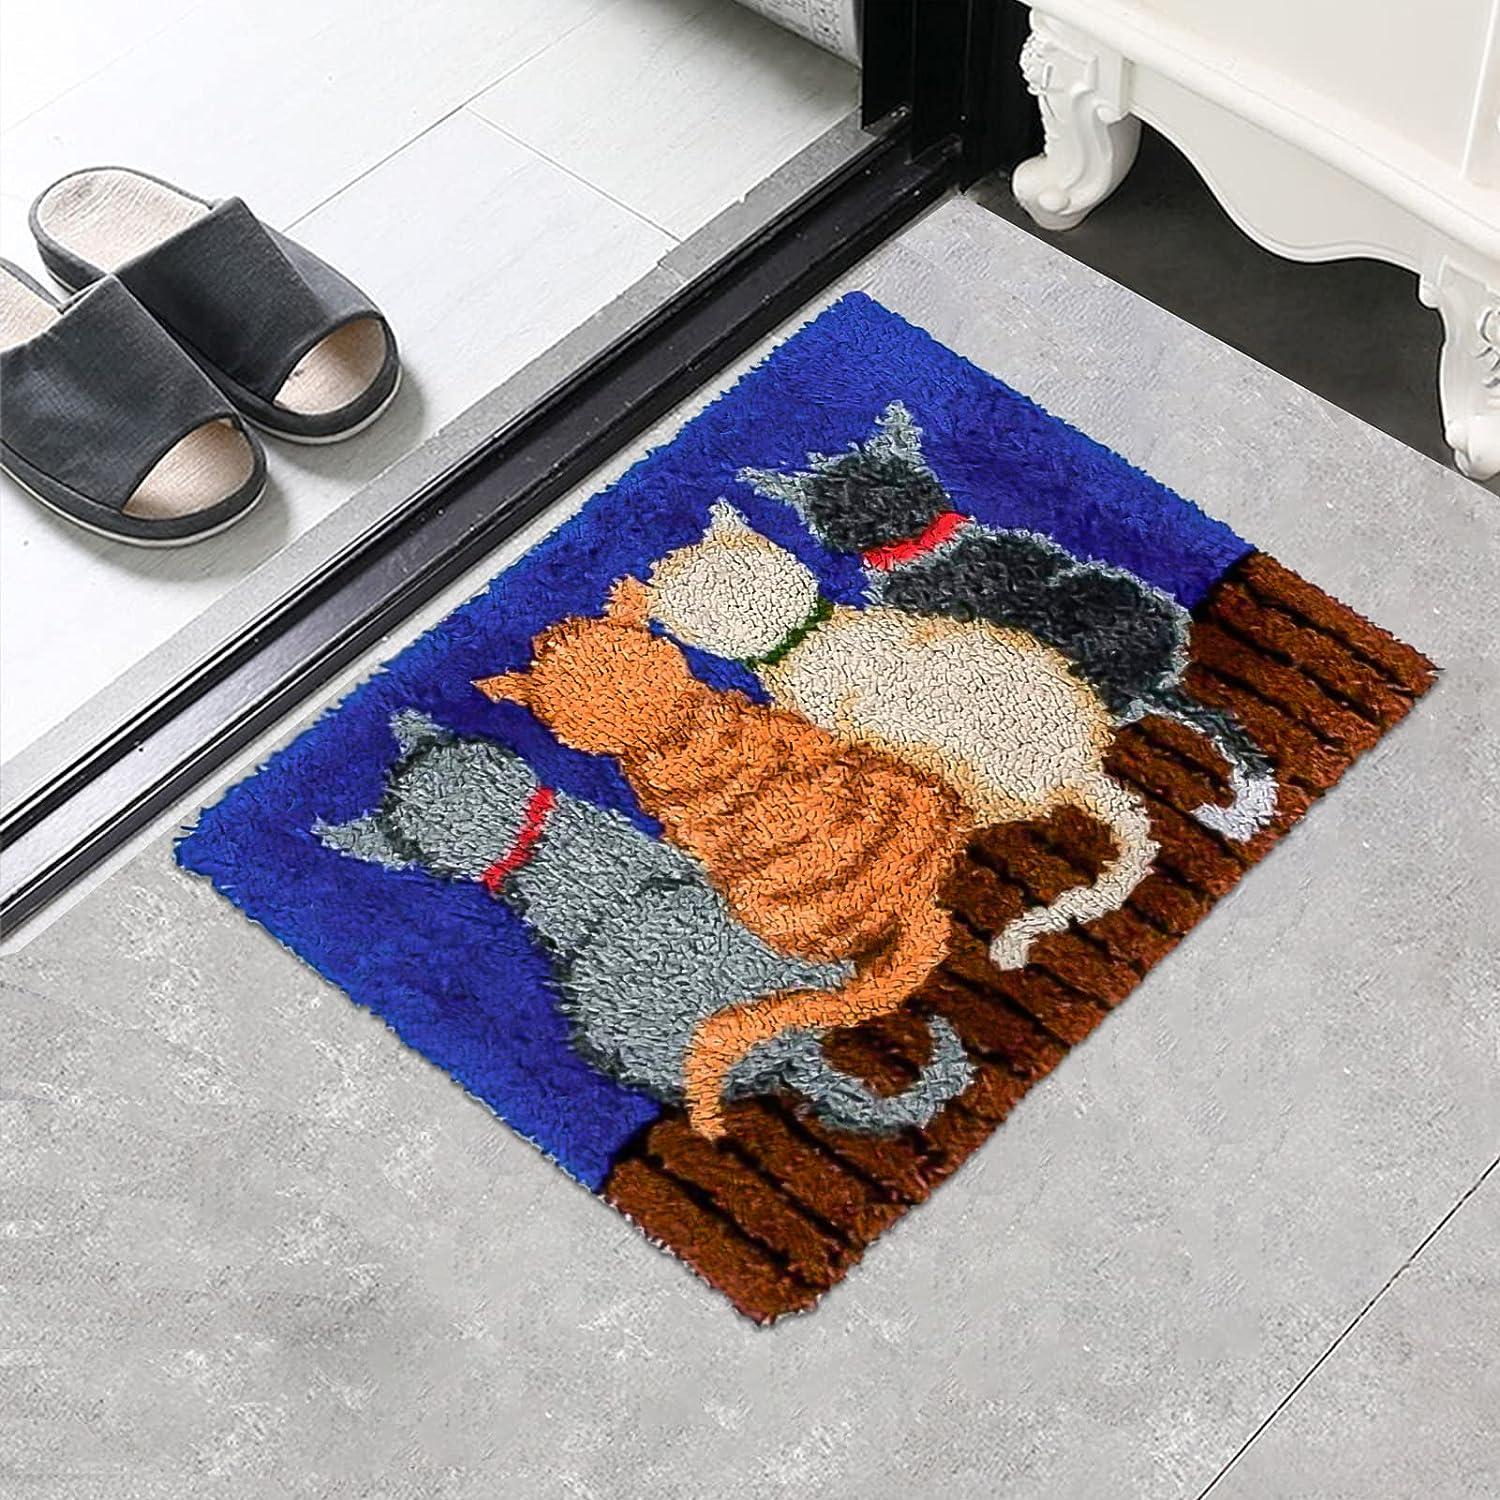 Latch Hook Rugs Kits for Adults Carpet embroidery with Pattern Printed Fish  Canvas Rug Crochet Patterns Yarn Kits Tapestry - AliExpress